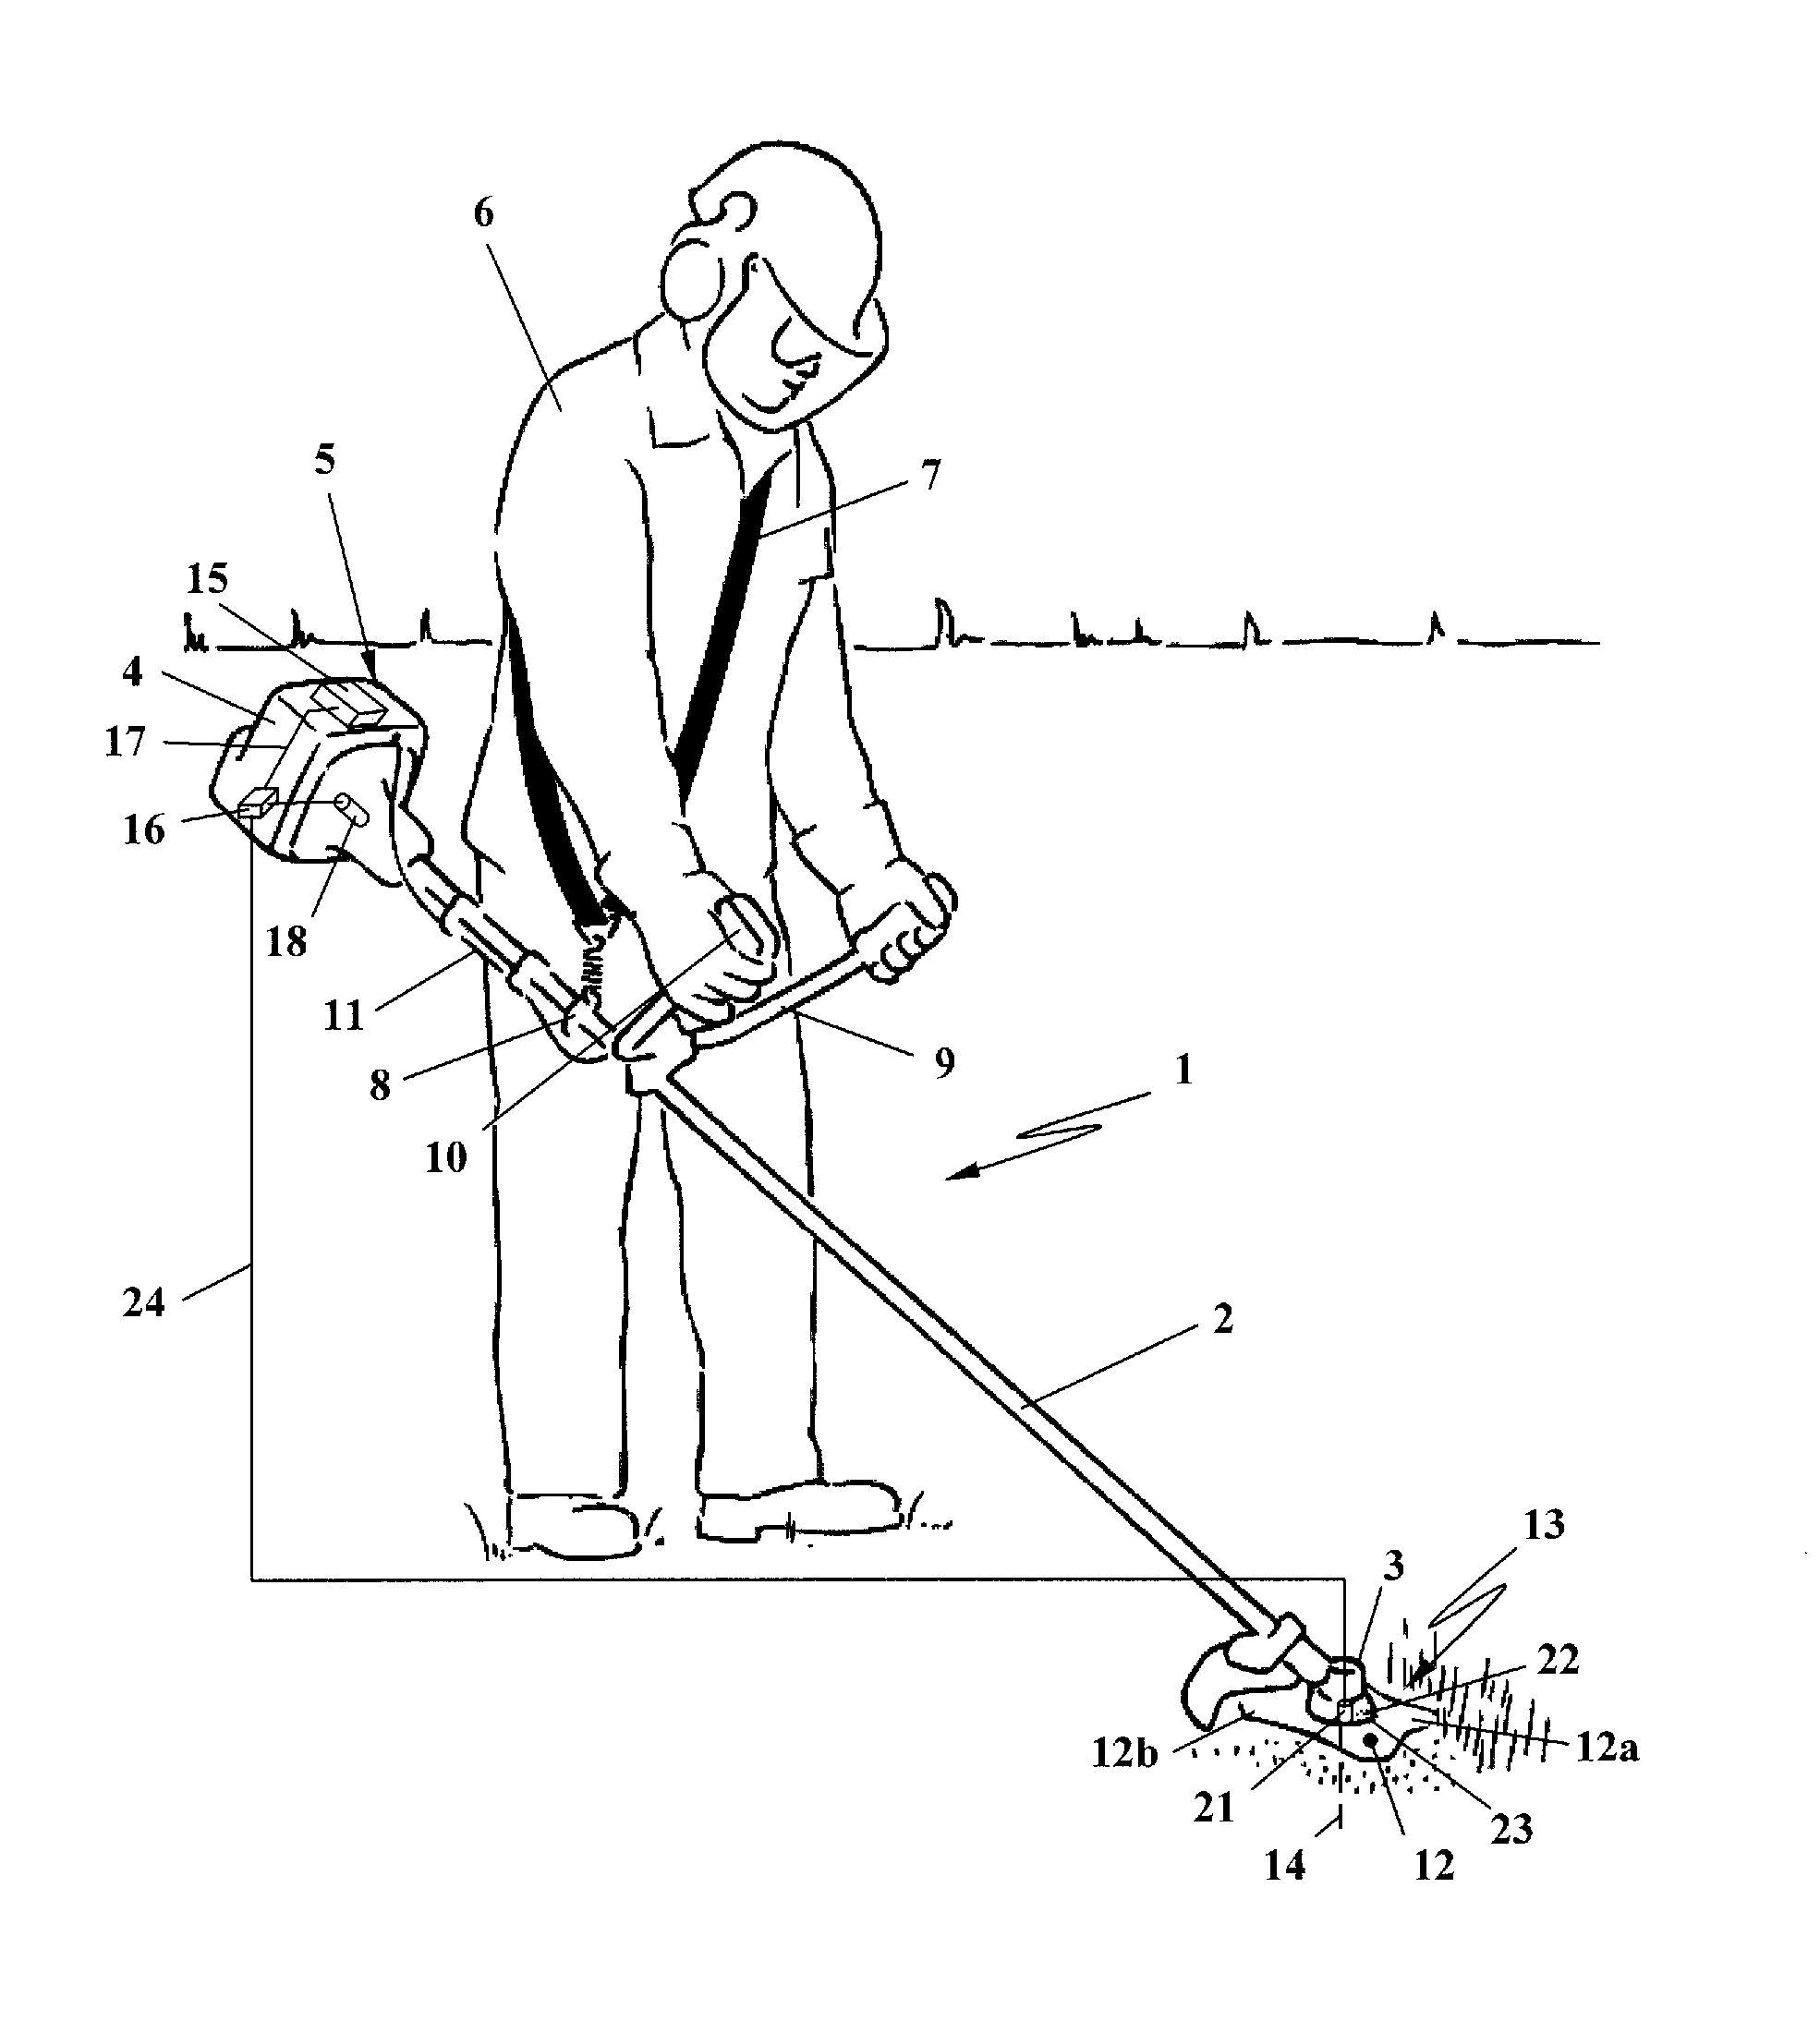 Handheld work apparatus with switchable power